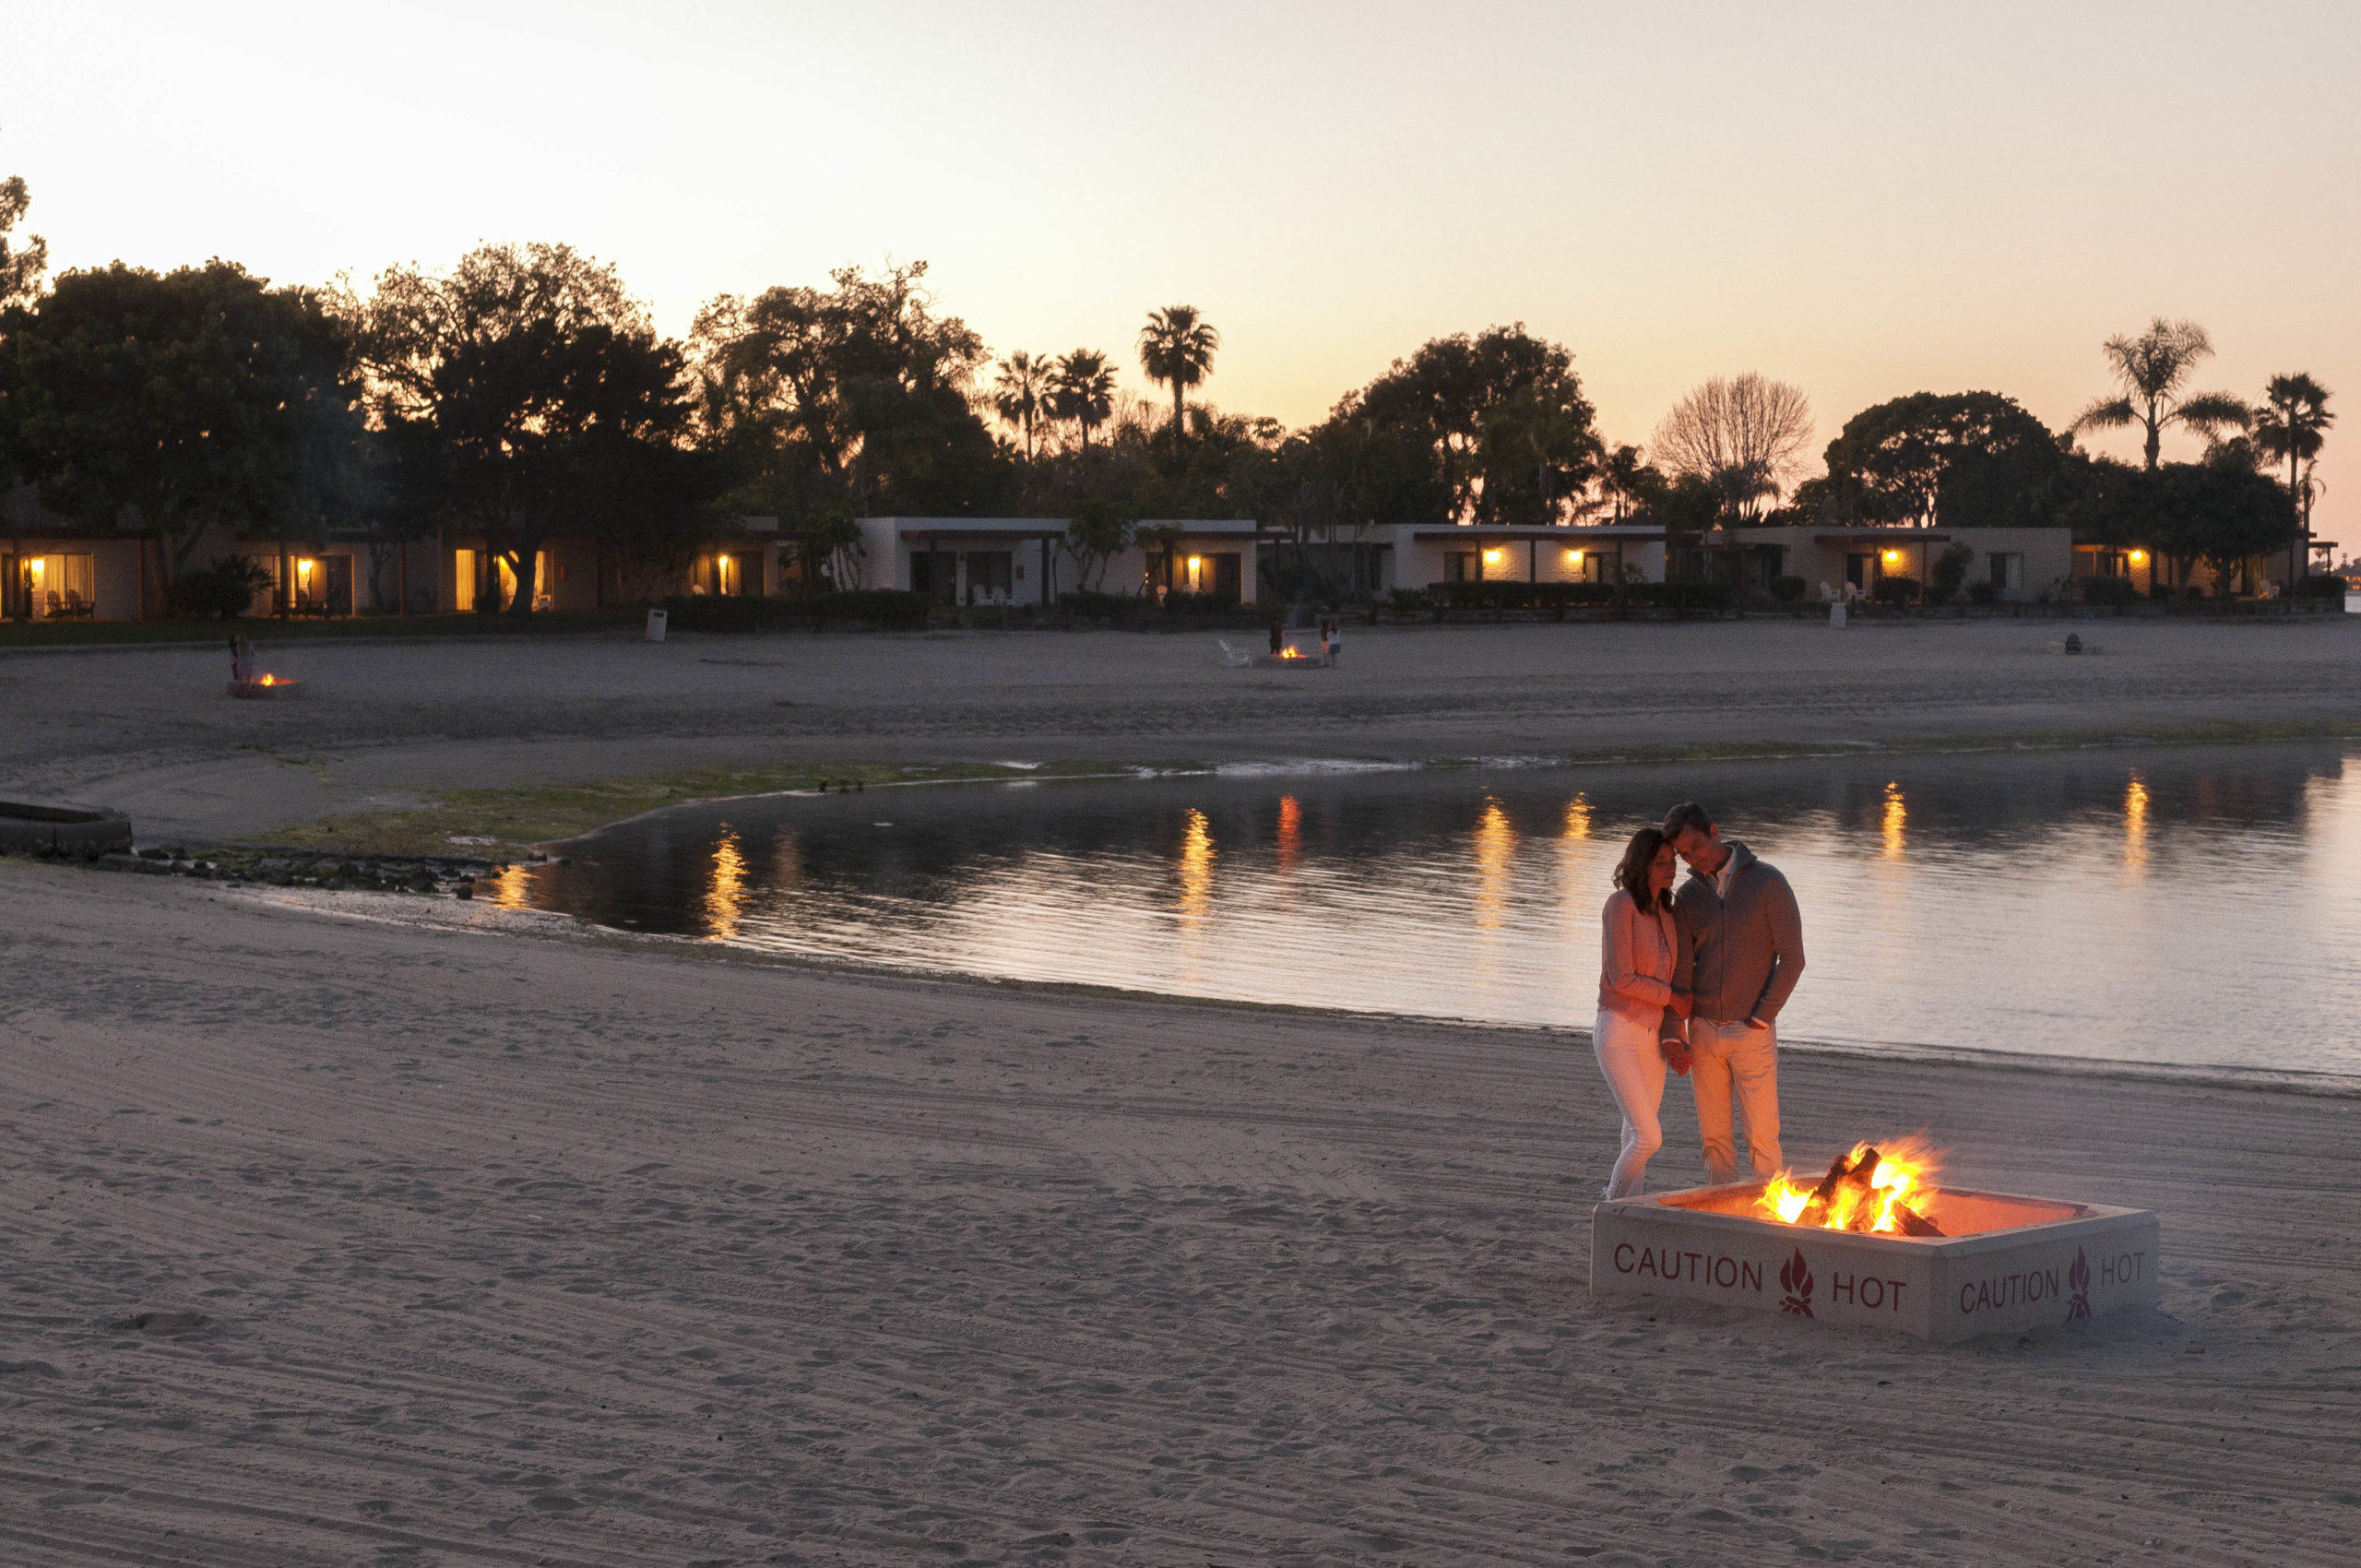 Couple on beach at fire pit